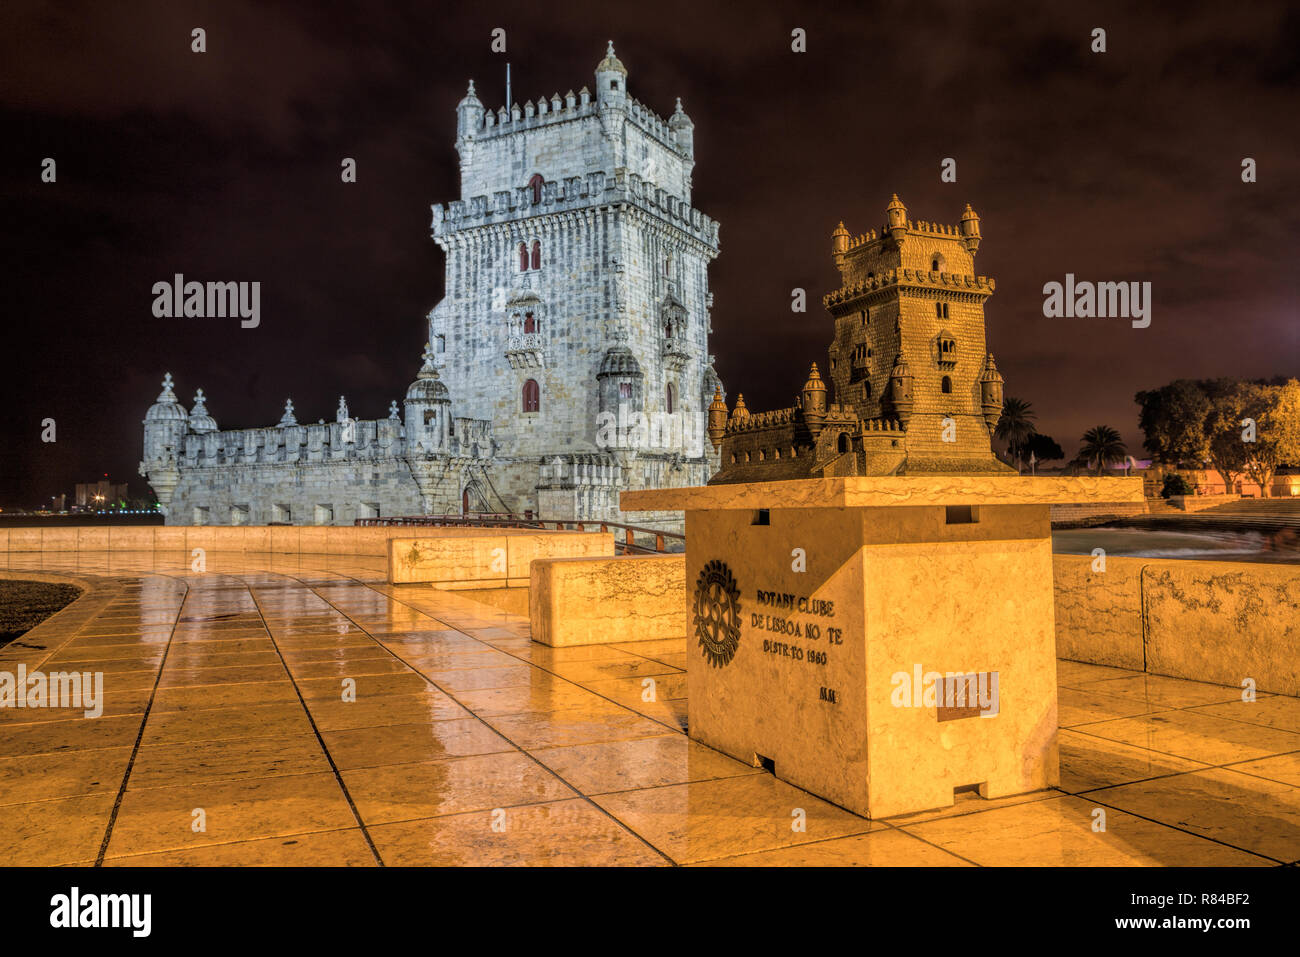 view of the illuminated Torre de Belem in Lisbon at night Stock Photo